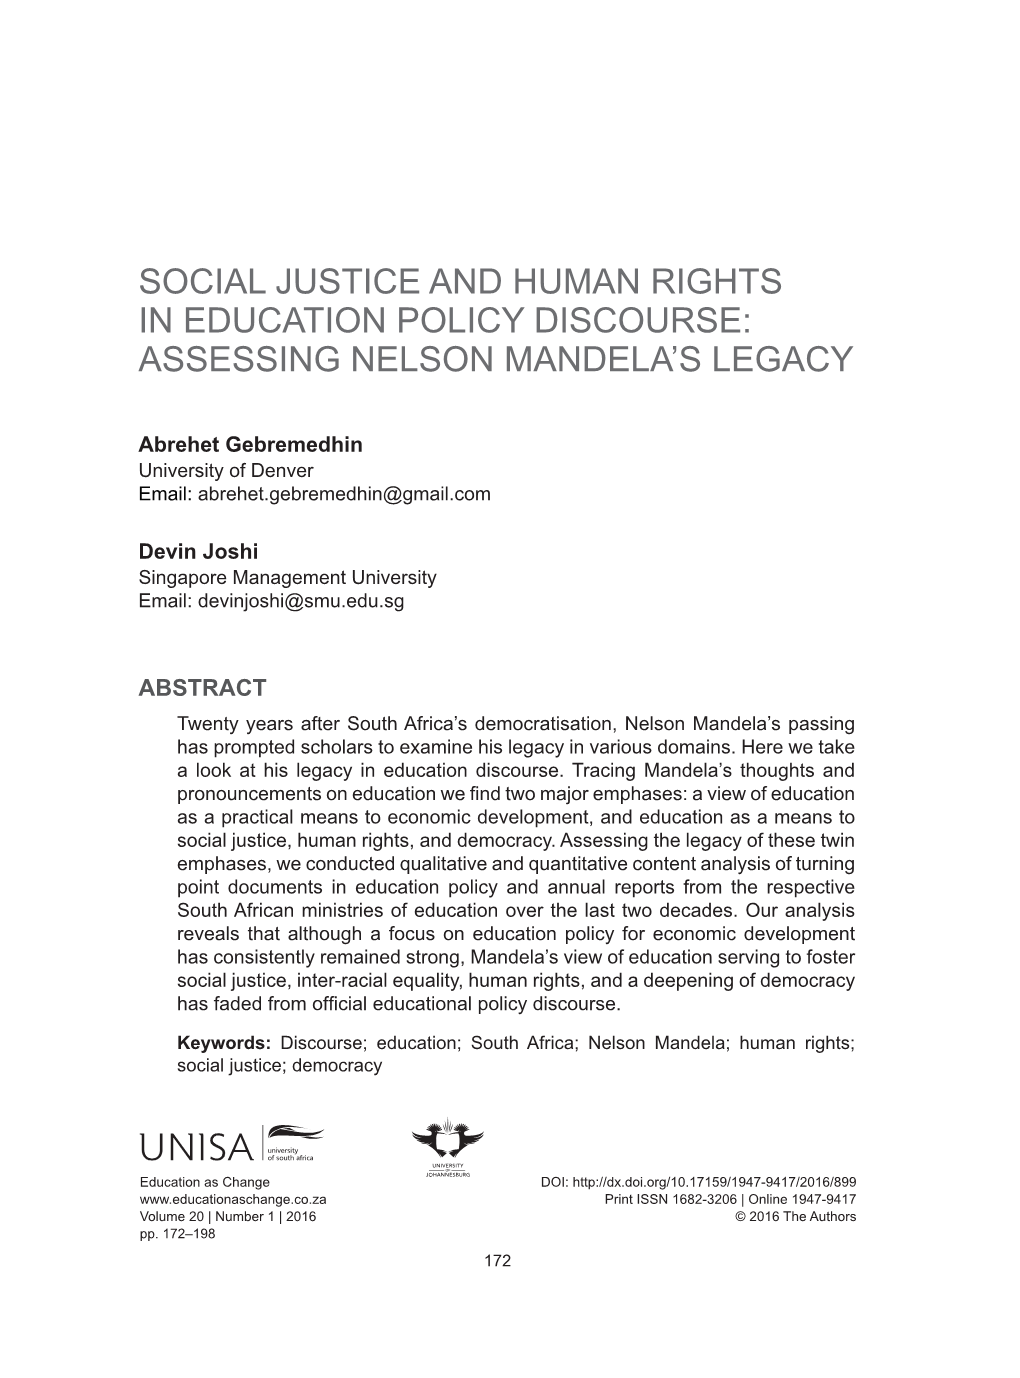 Social Justice and Human Rights in Education Policy Discourse: Assessing Nelson Mandela’S Legacy